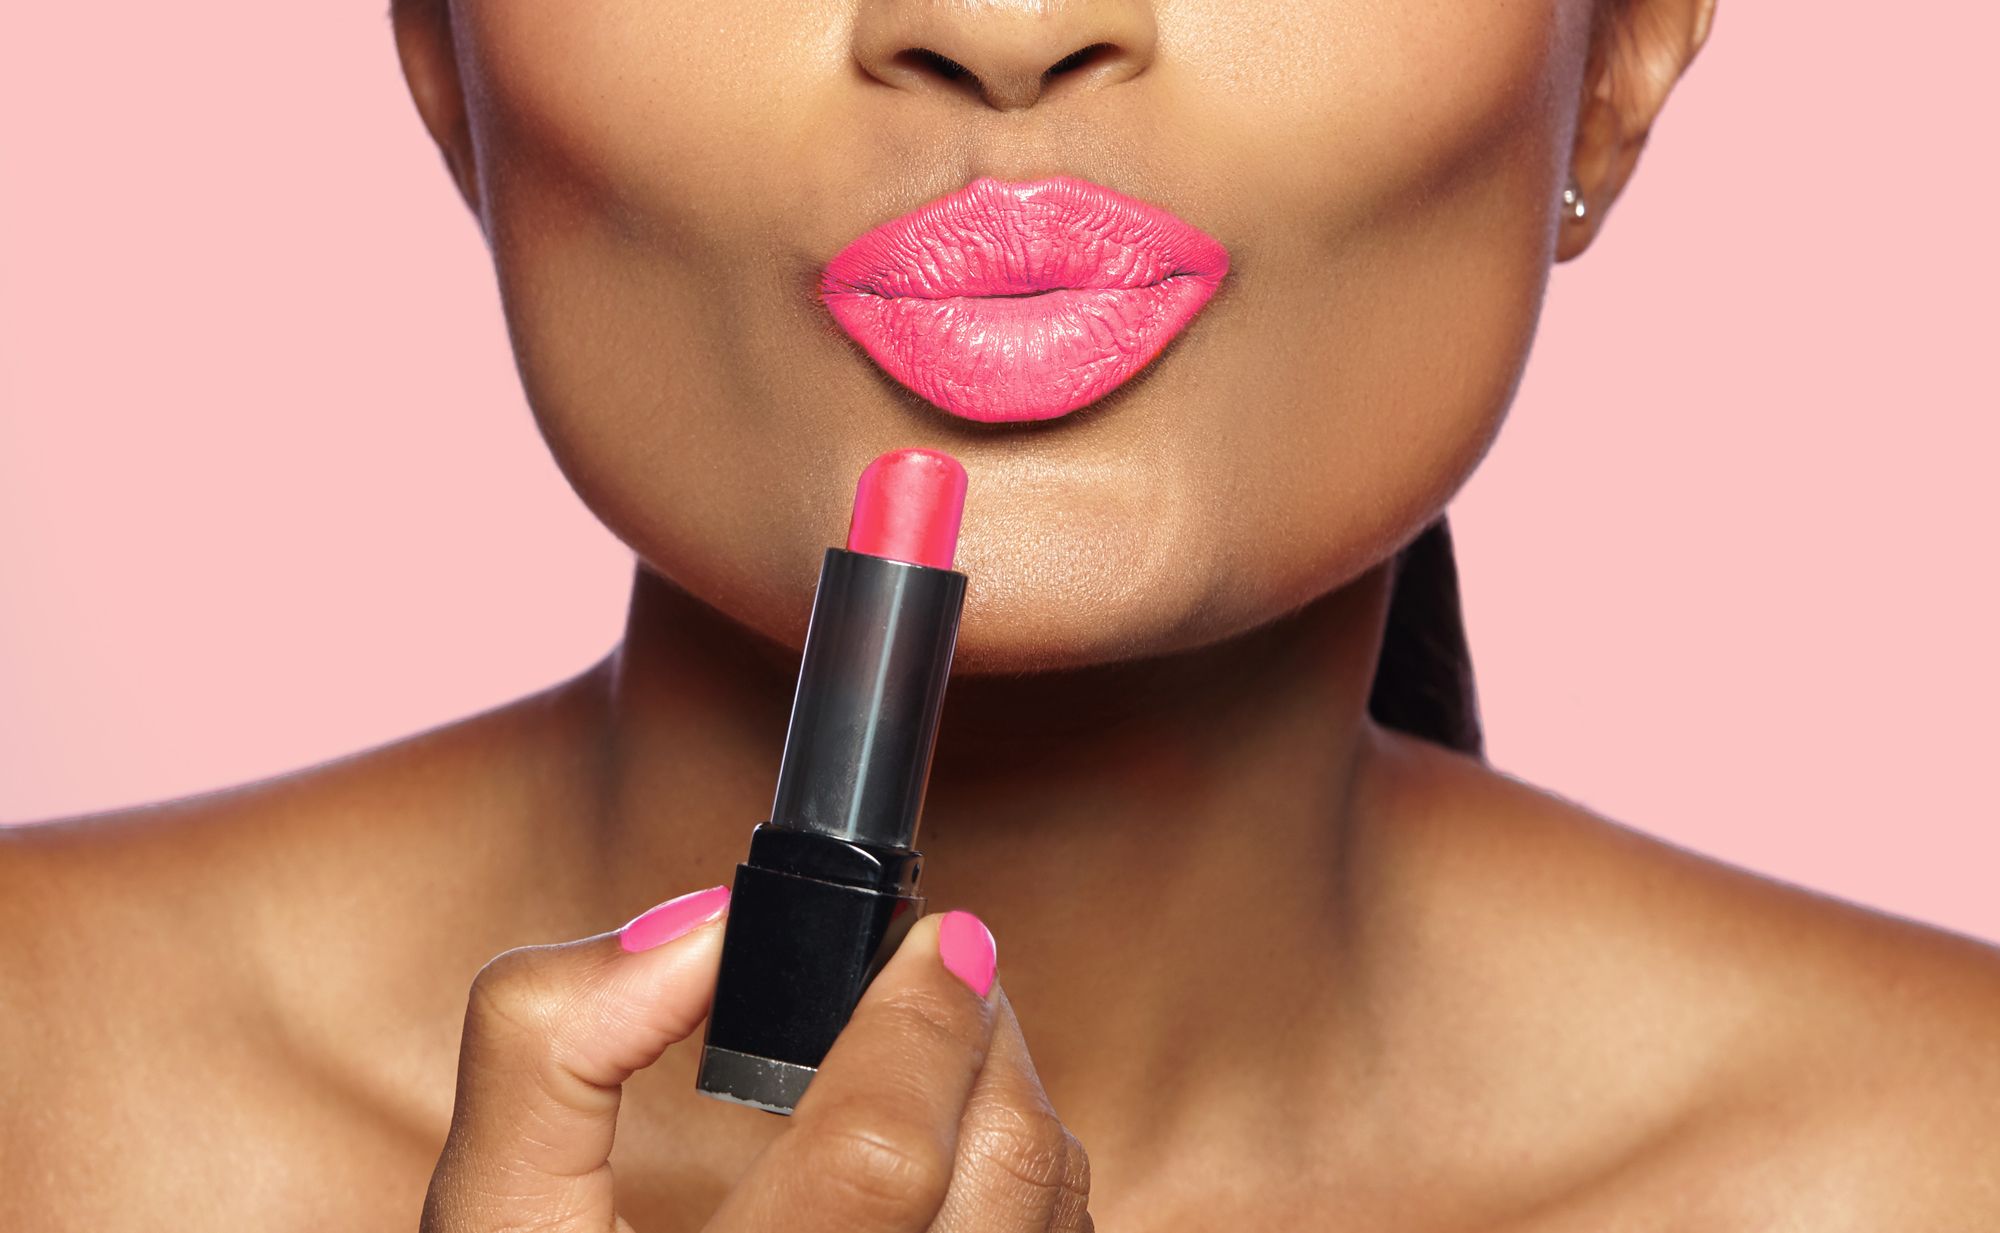 How to Apply Lipstick Perfectly and Make It Last the Entire Day